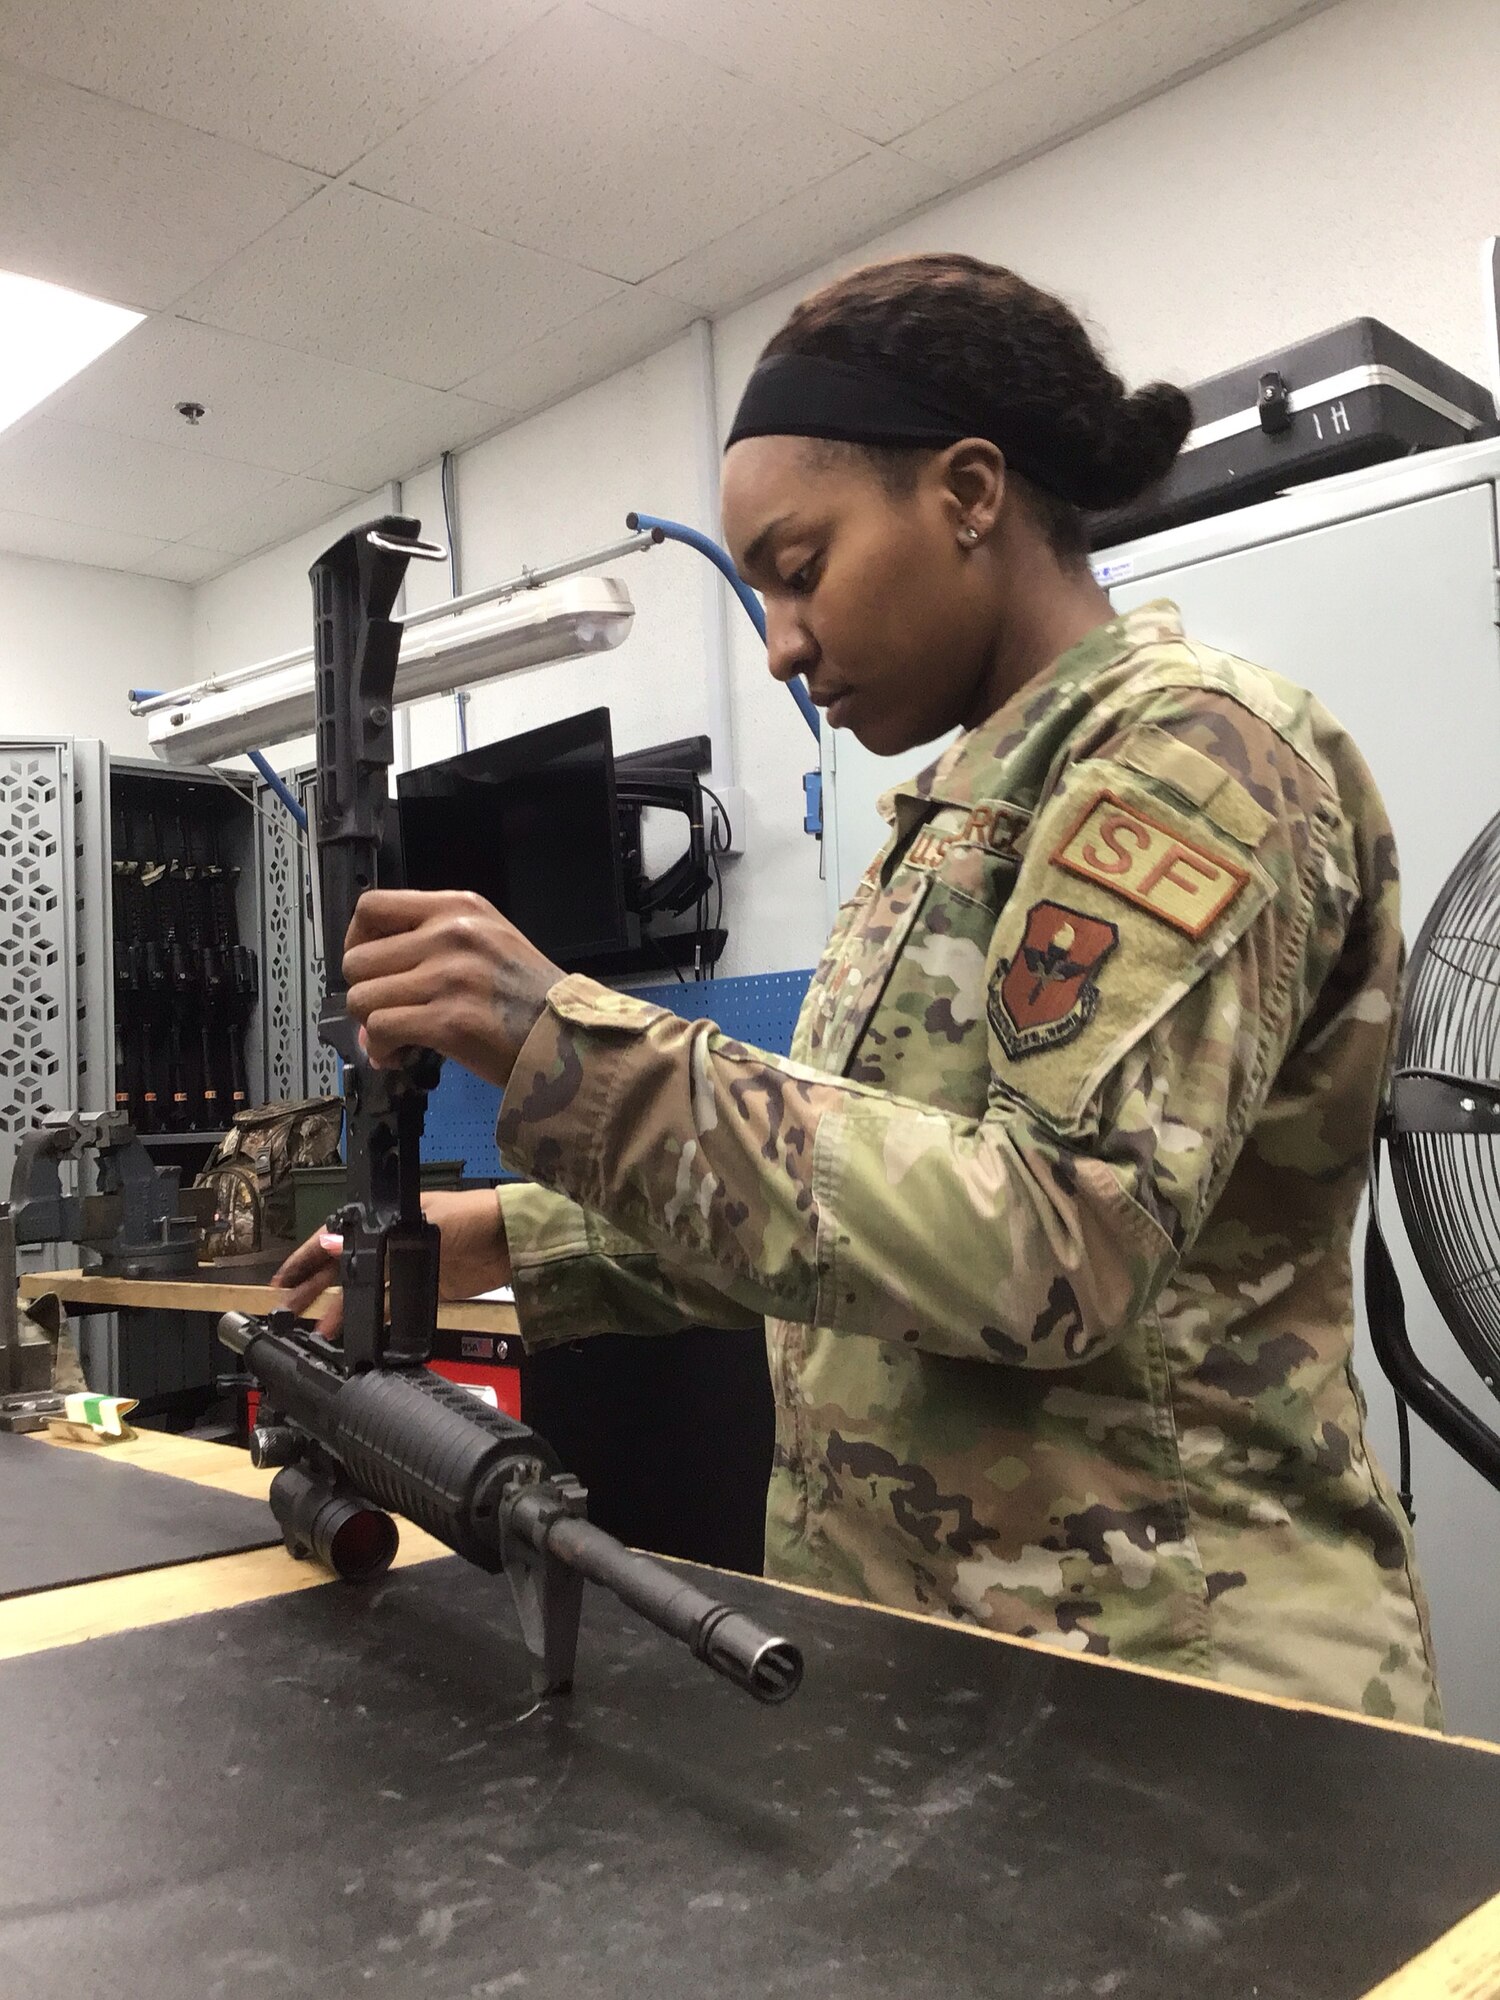 JOINT BASE SAN ANTONIO-CHAPMAN TRAINING ANNEX, Texas – Courage and resiliency are part of day-to-day operations here, so a strong mentality is nothing new for five female security forces specialists assigned to the 37th Training Support Squadron Combat Weapons Flight.